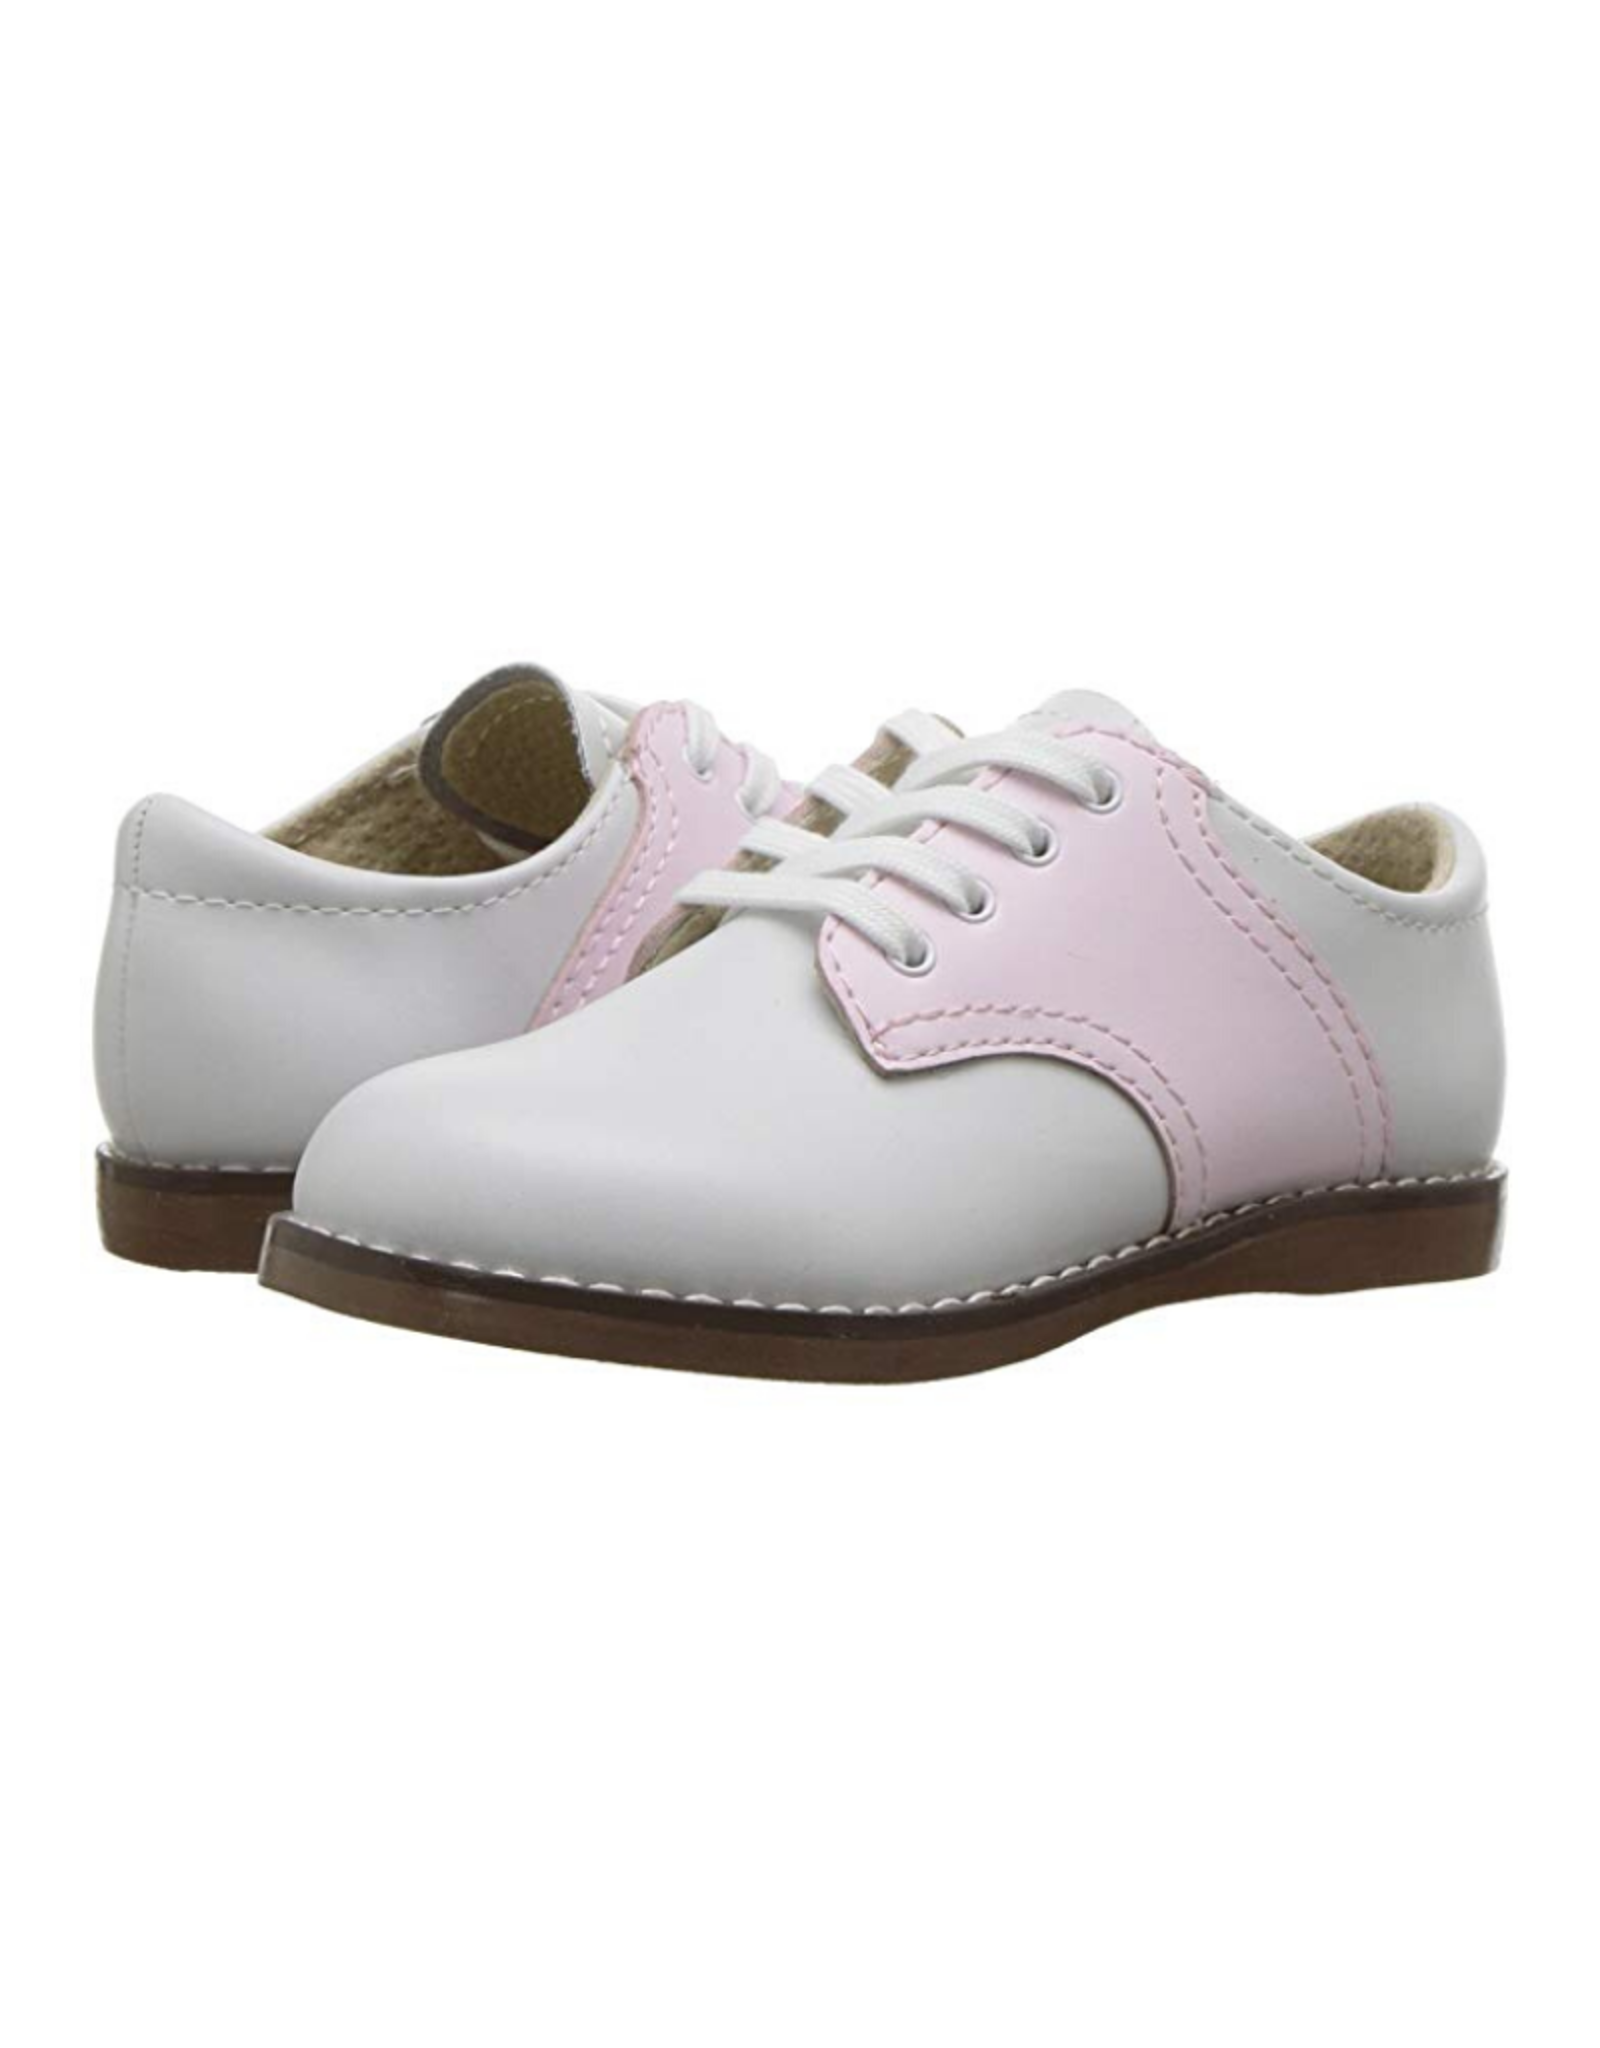 Footmates Cheer White And Rose Saddle Oxford